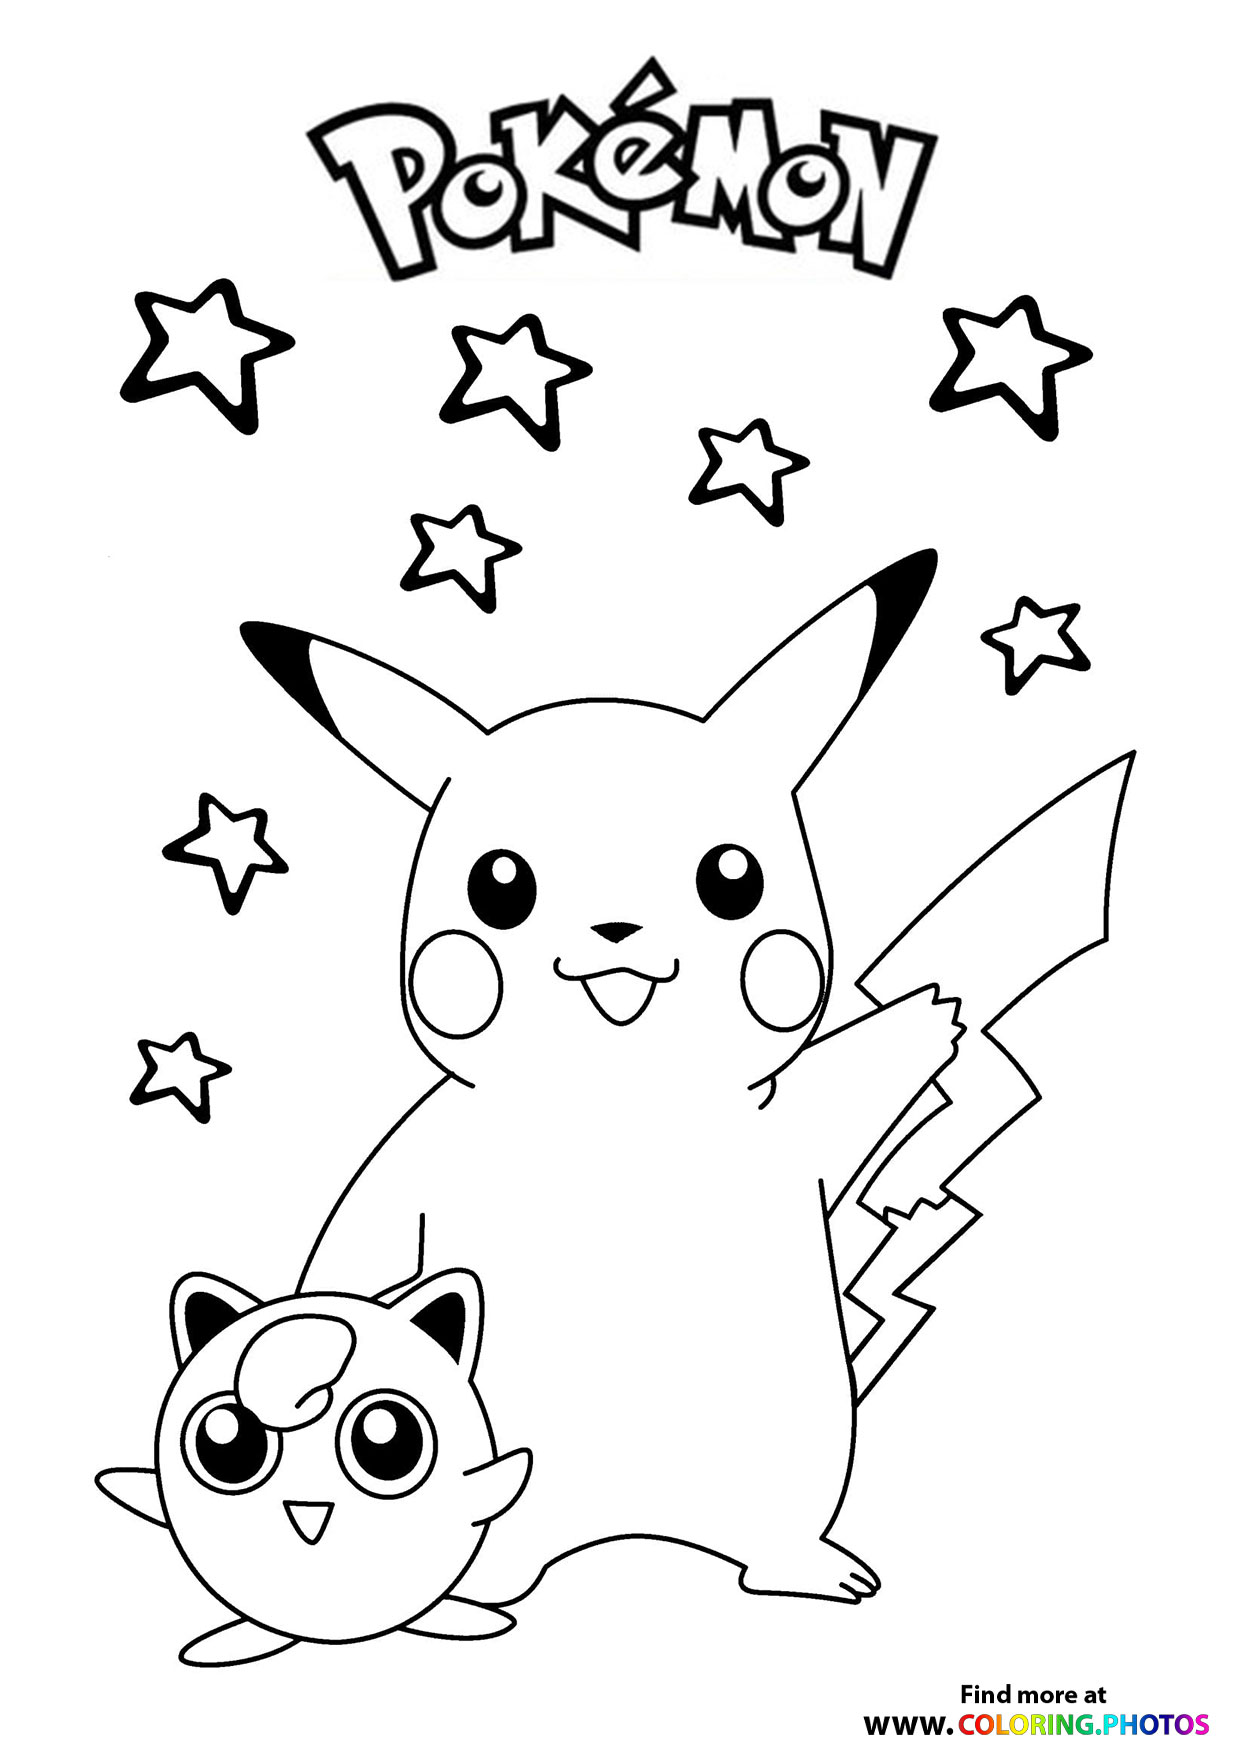 Pikachu and Jigglypuff - Pokemon - Coloring Pages for kids